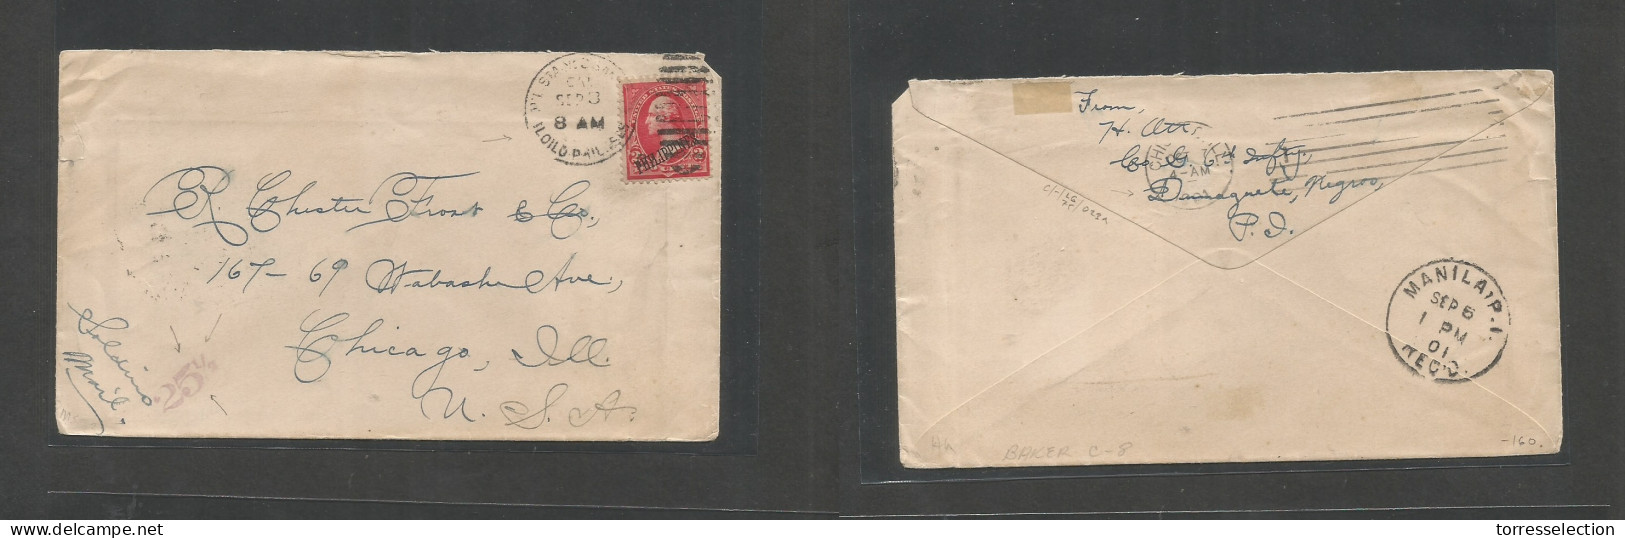 PHILIPPINES. 1901 (Sept 8) Mil Sta. IloIlo - USA, Chicago (7 Oct) US Ovptd Fkd Env, Cds Tied. Fine. Soldiers Mail + Taxe - Philippines